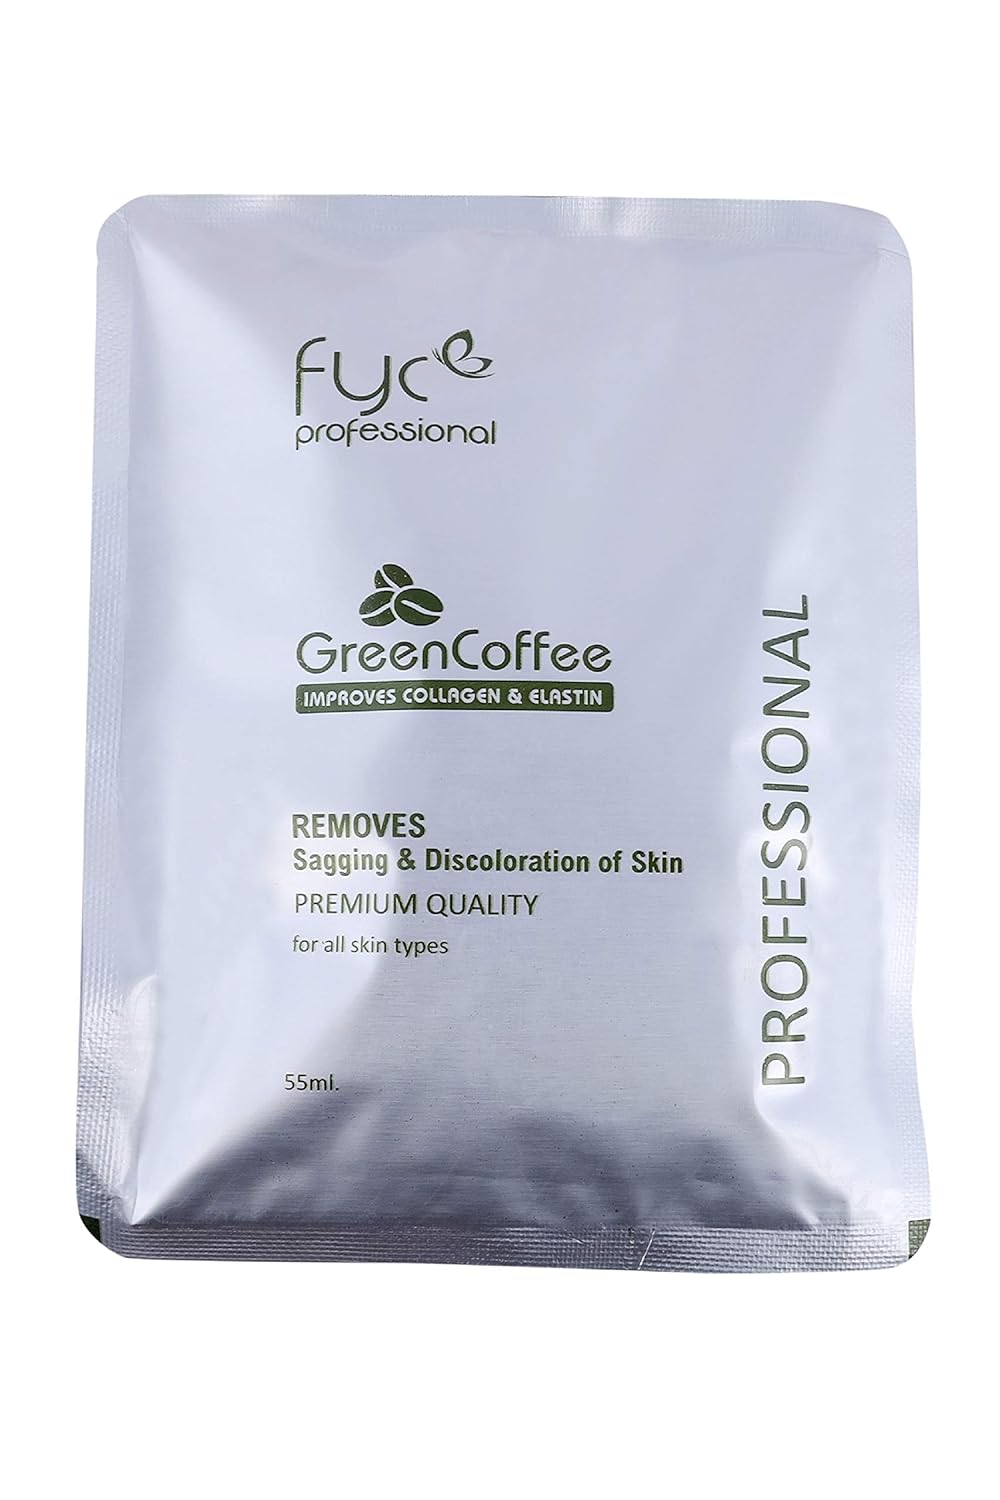 FYC PROFESSIONAL GREEN COFFEE FACIAL KIT